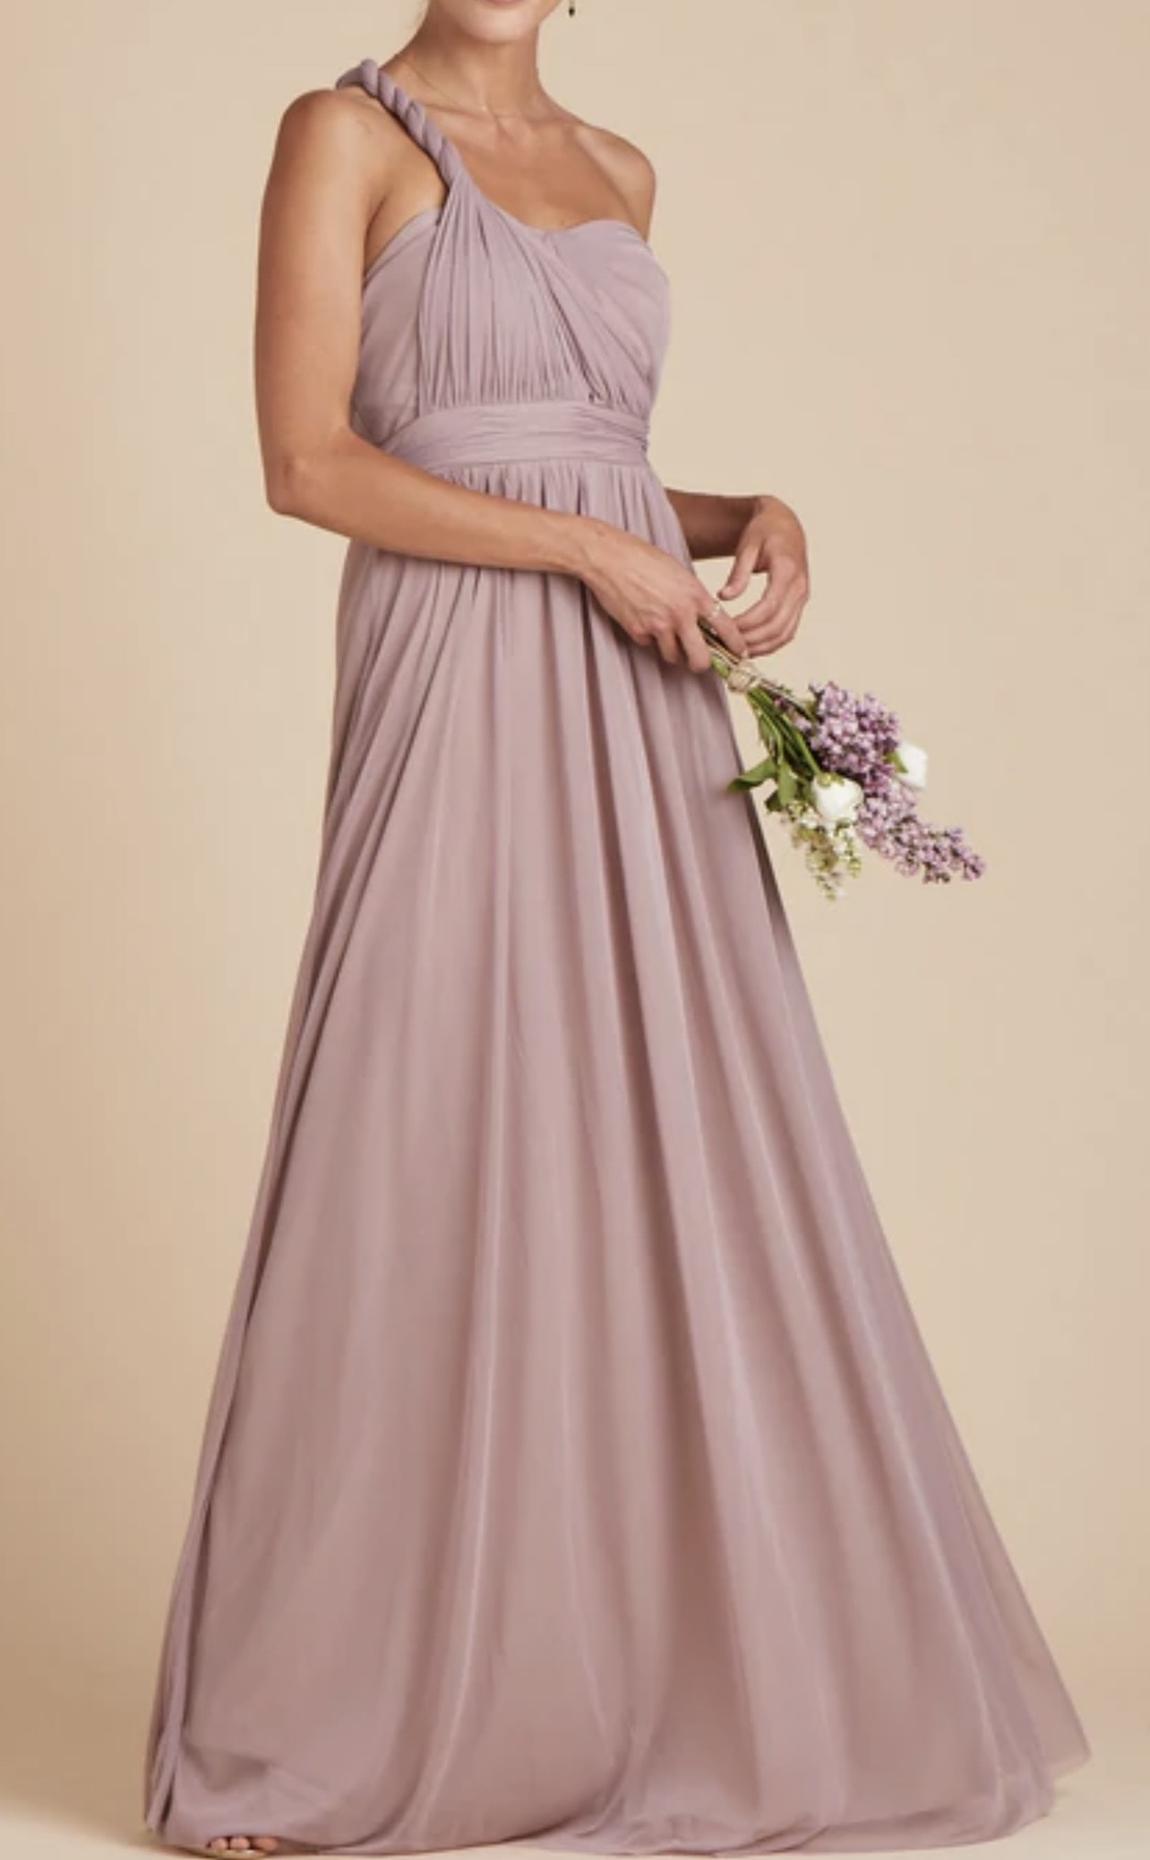 Birdy Grey Size 6 Bridesmaid Strapless Light Pink A-line Dress on Queenly